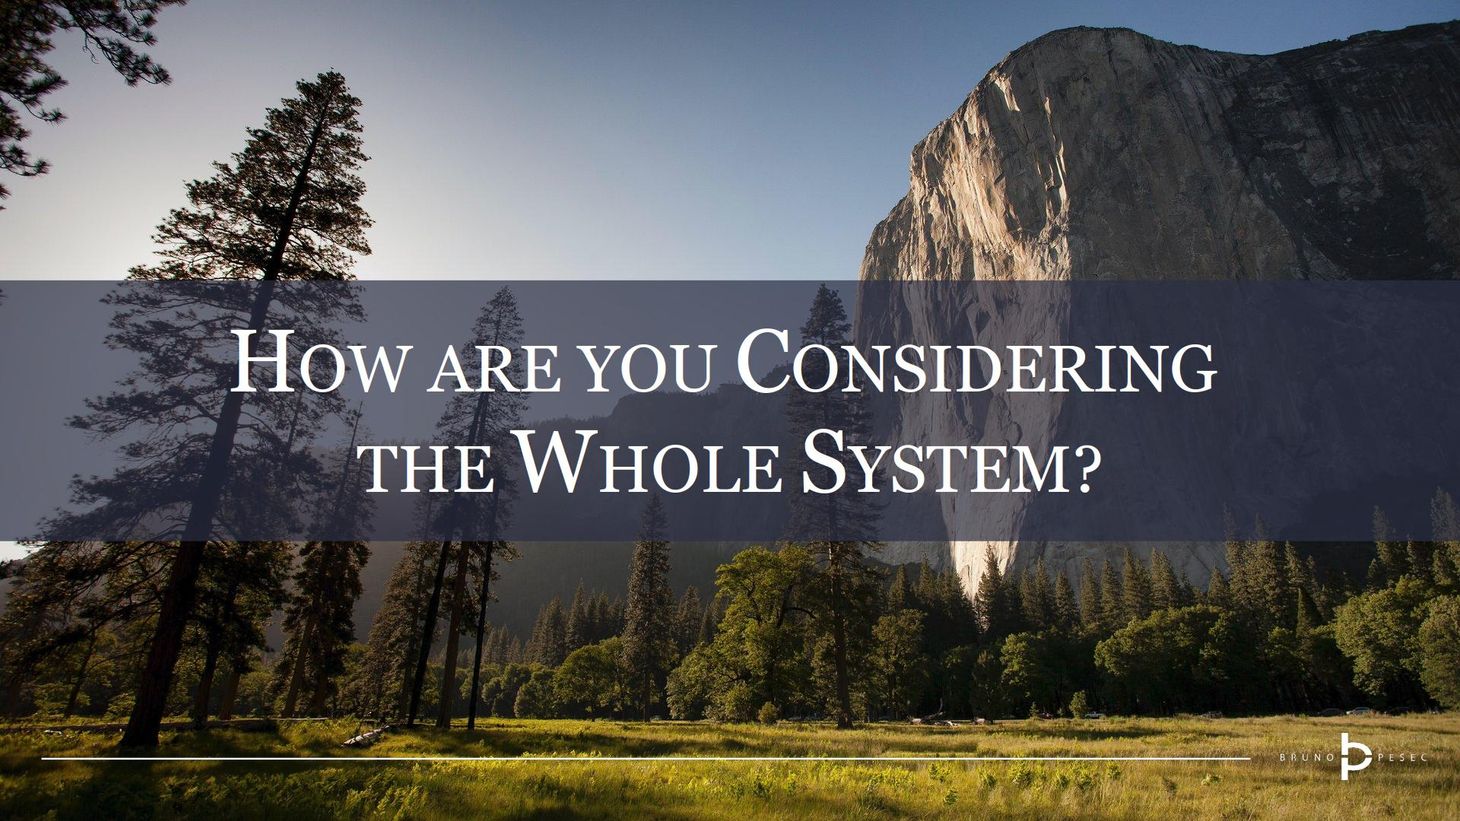 How are you considering the whole system?